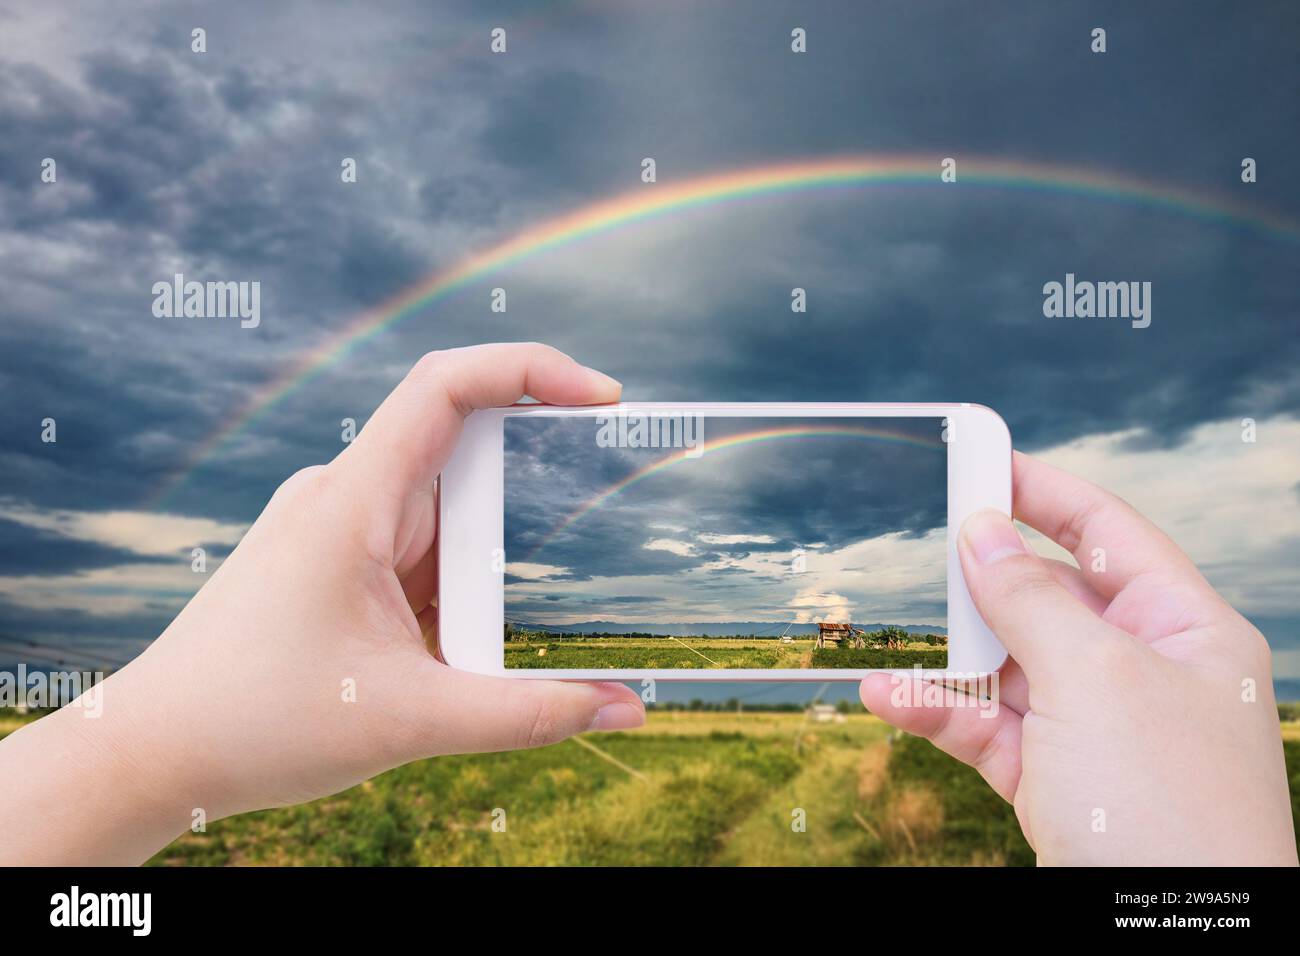 woman using mobile smartphone taking photo of rainbow in the sky over agriculture field Stock Photo